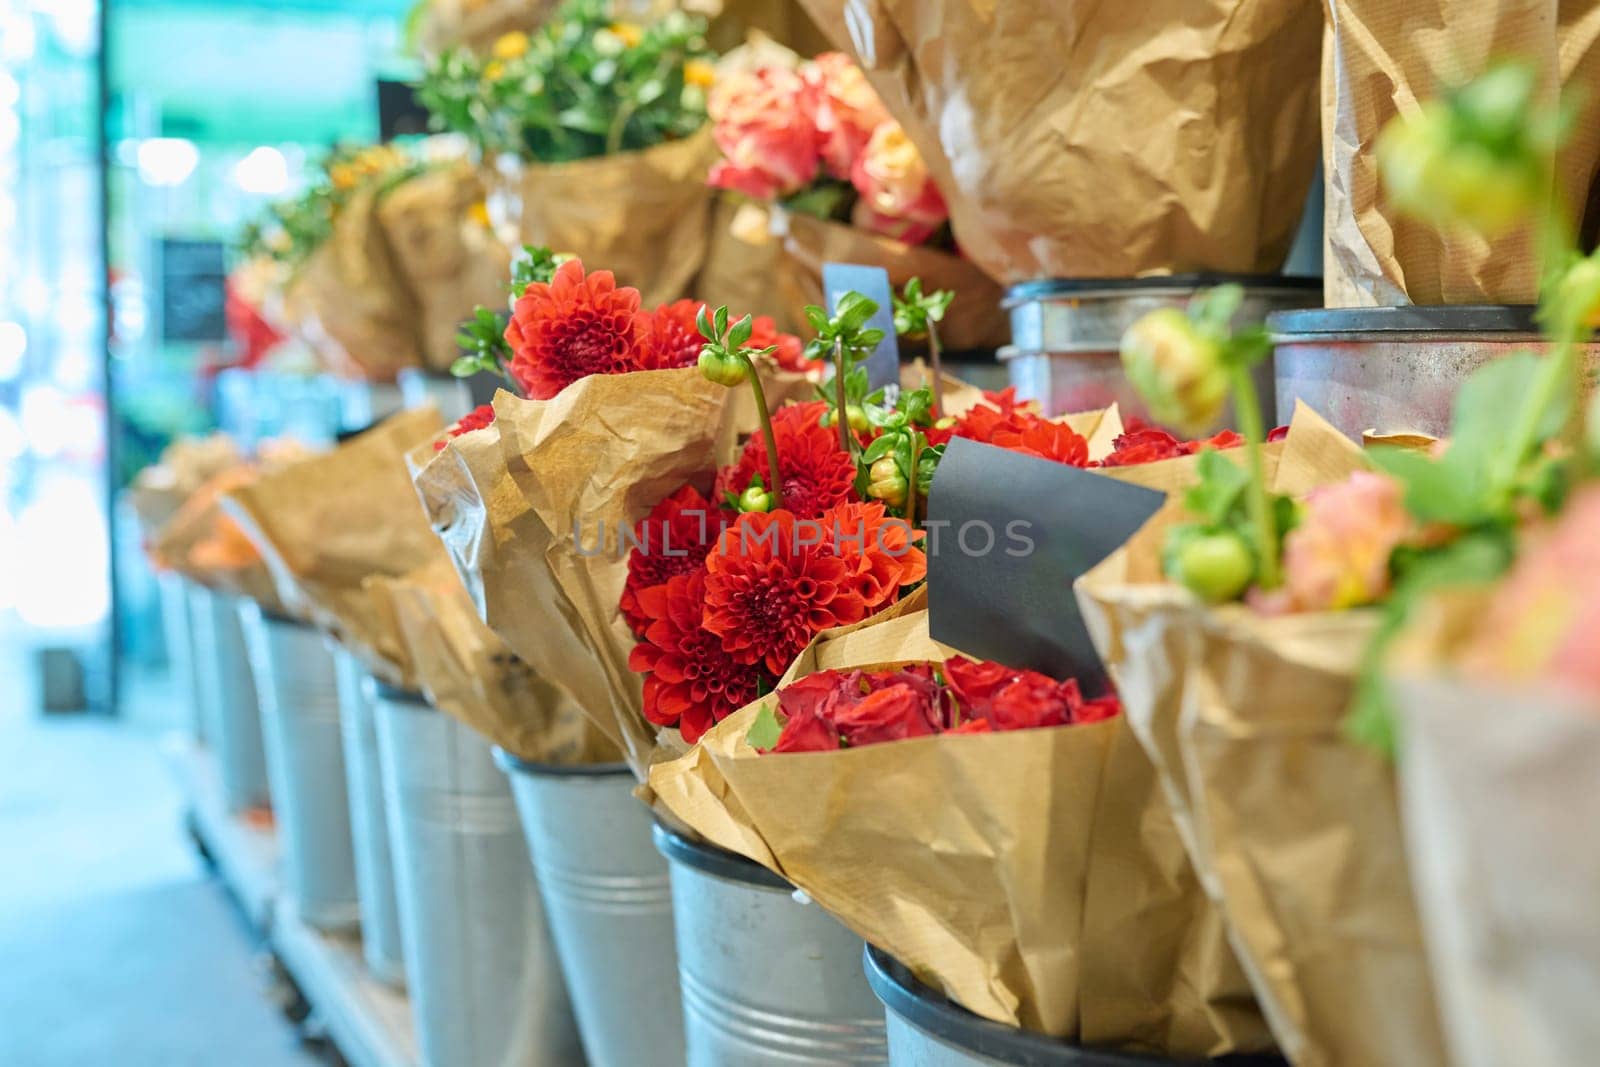 Flower shop, close-up of fresh flowers in buckets, red dahlias by VH-studio